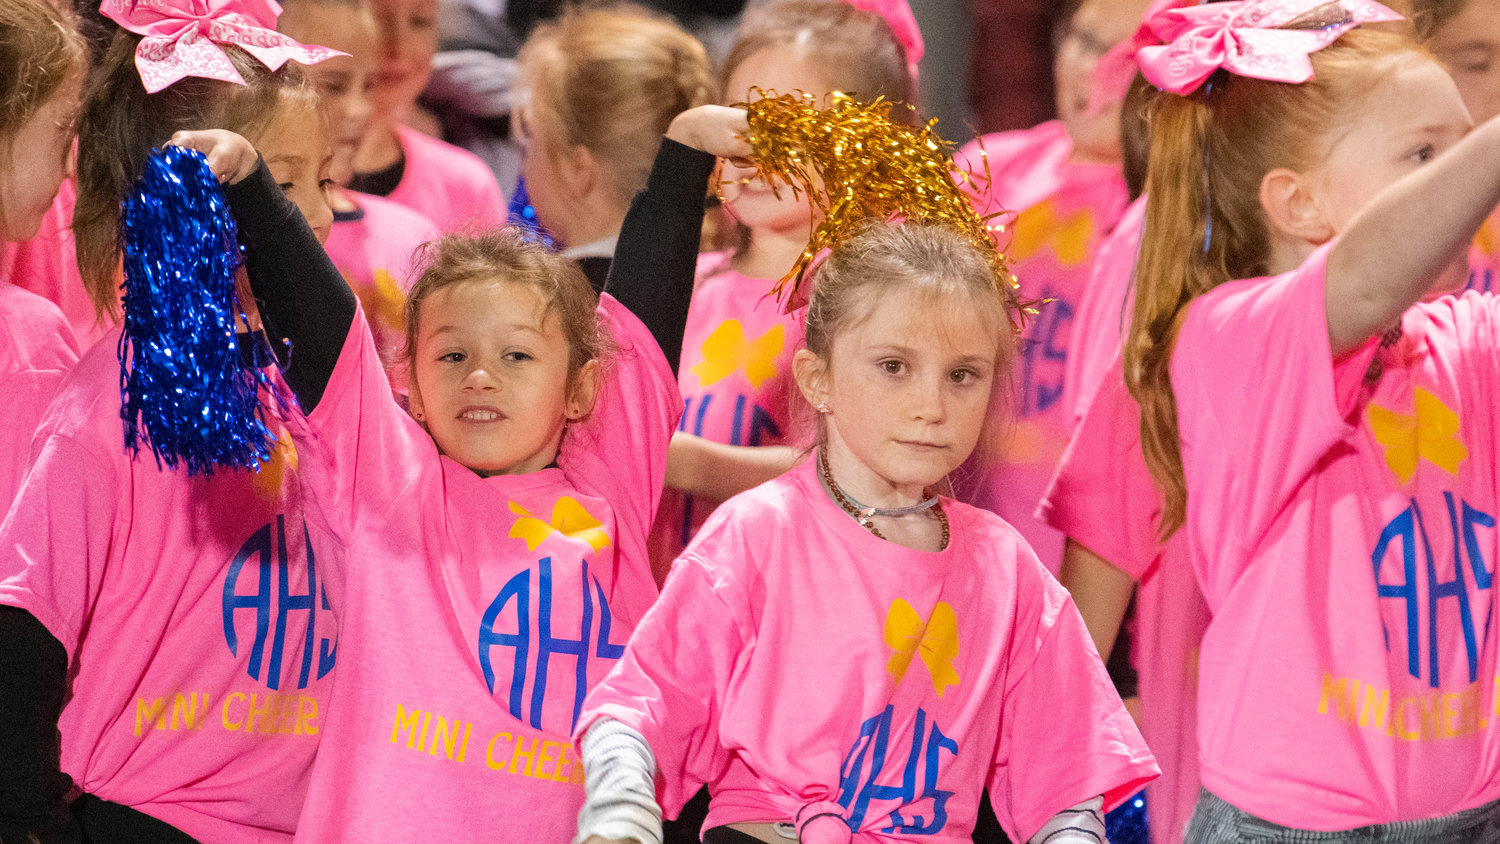 Mini cheerleaders look on and wave their pom-poms as they prepare to take the field at halftime during a Thursday night game at Pirate Stadium.